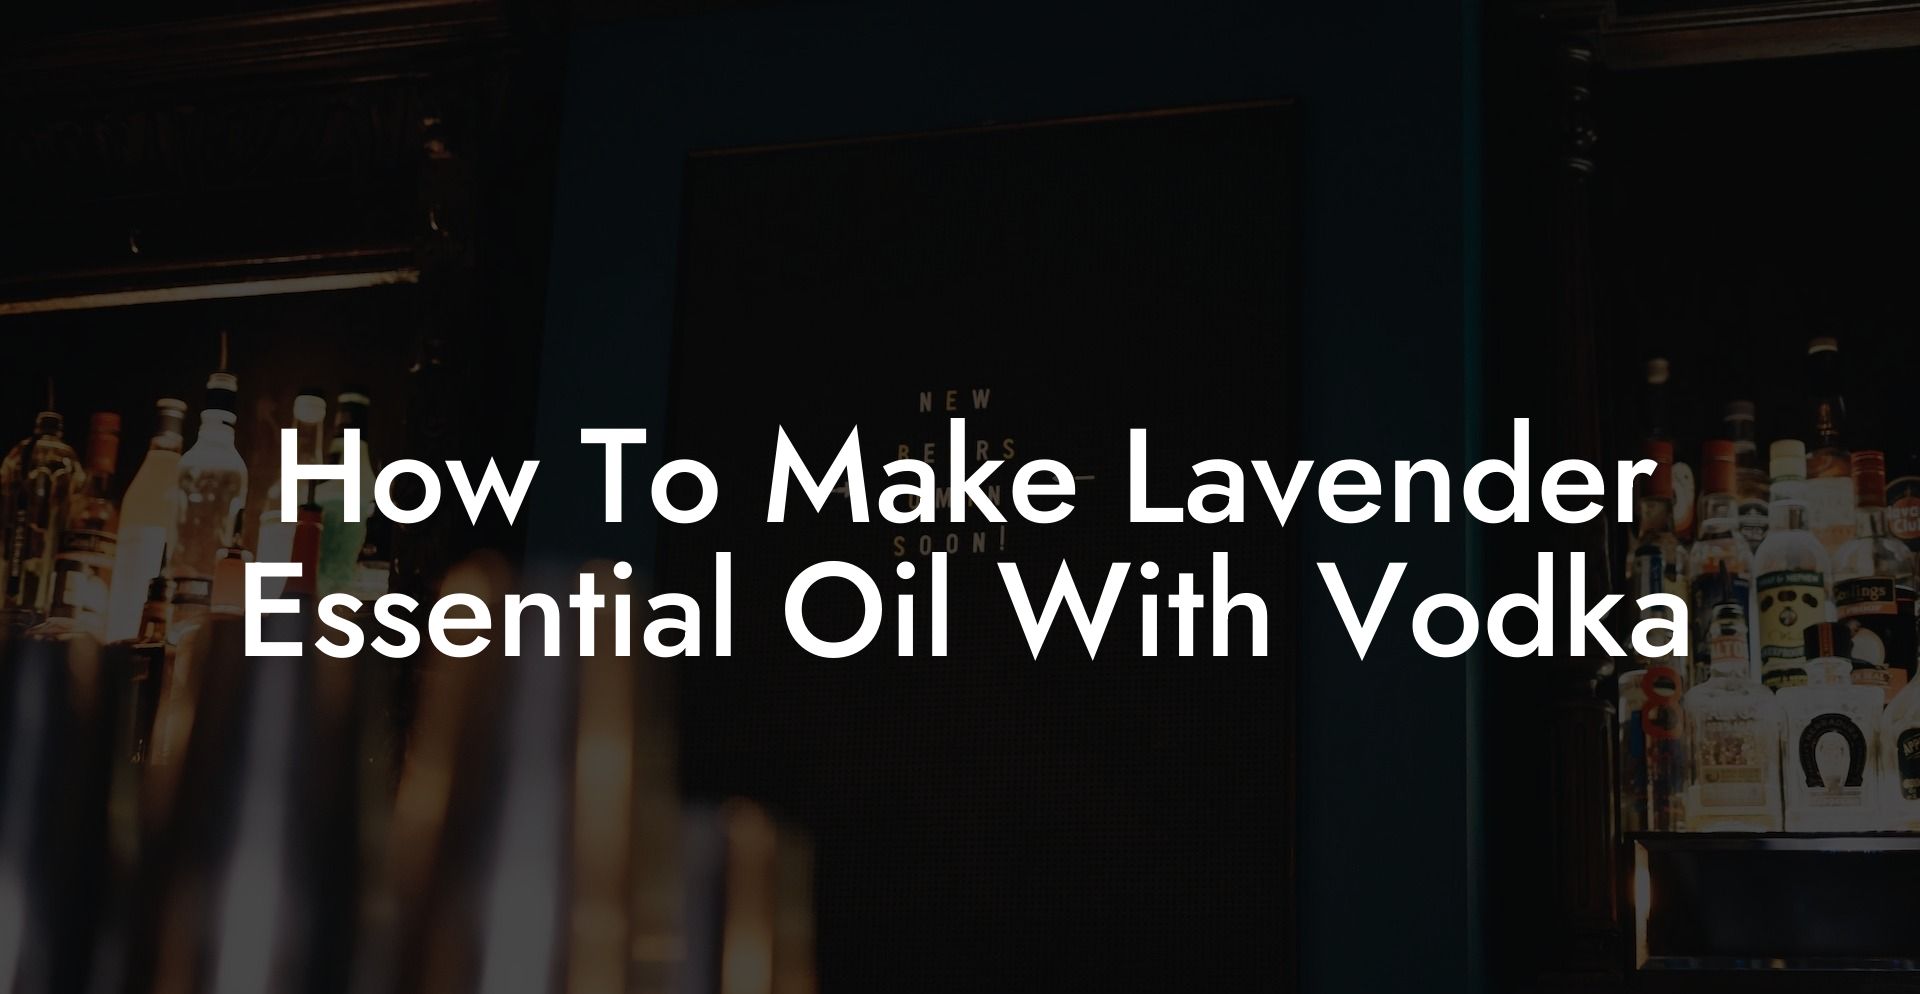 How To Make Lavender Essential Oil With Vodka